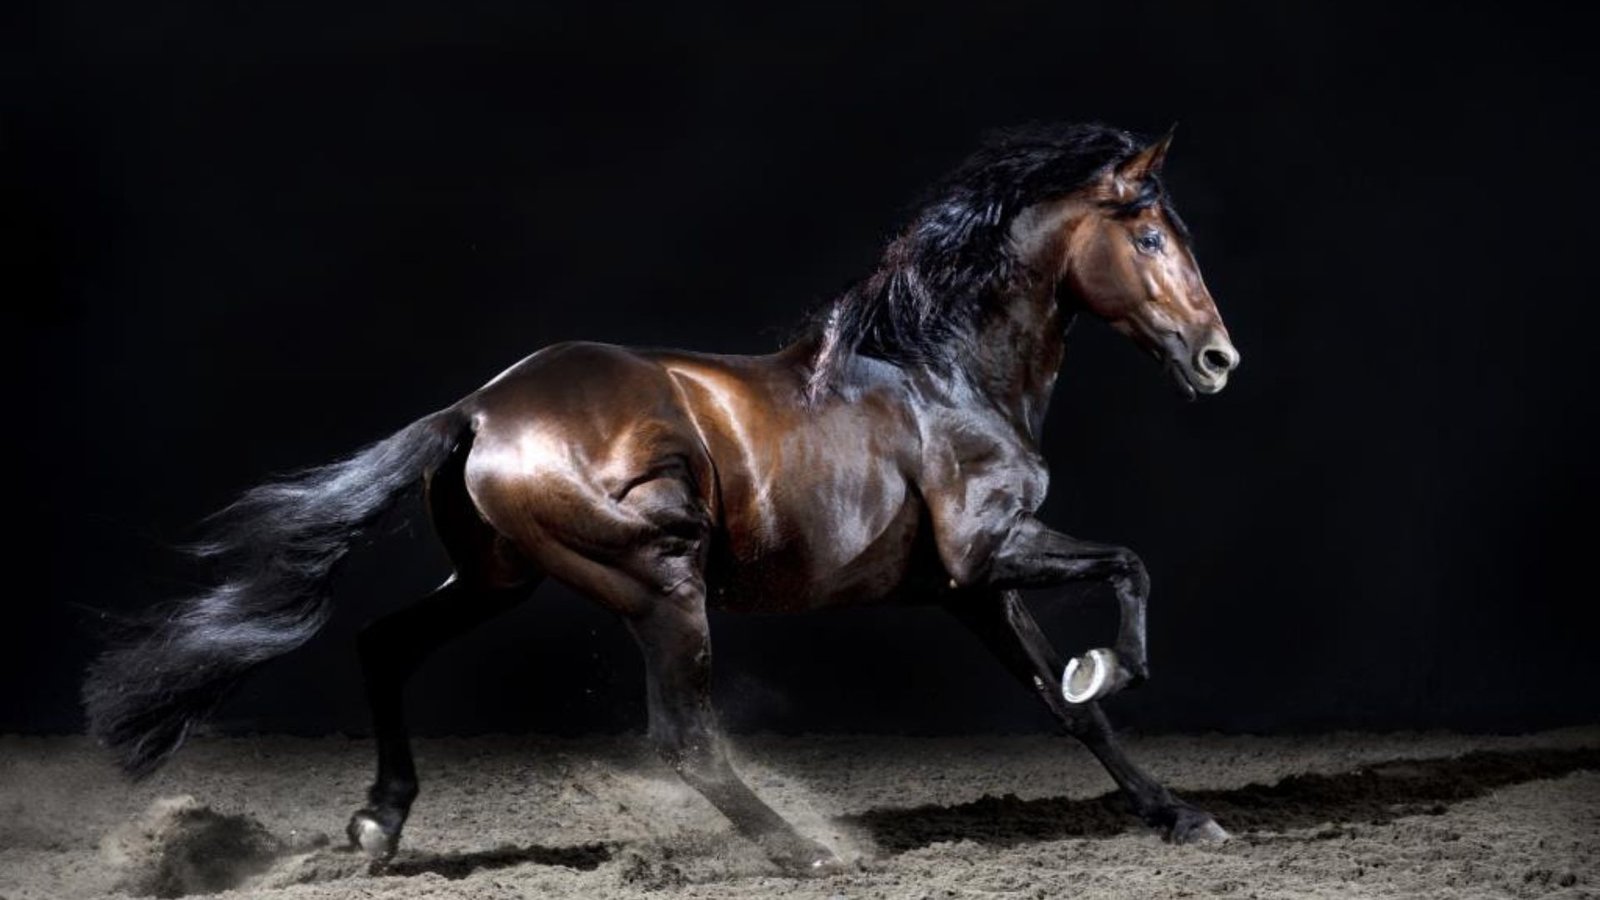 this image shows Horse Photography 